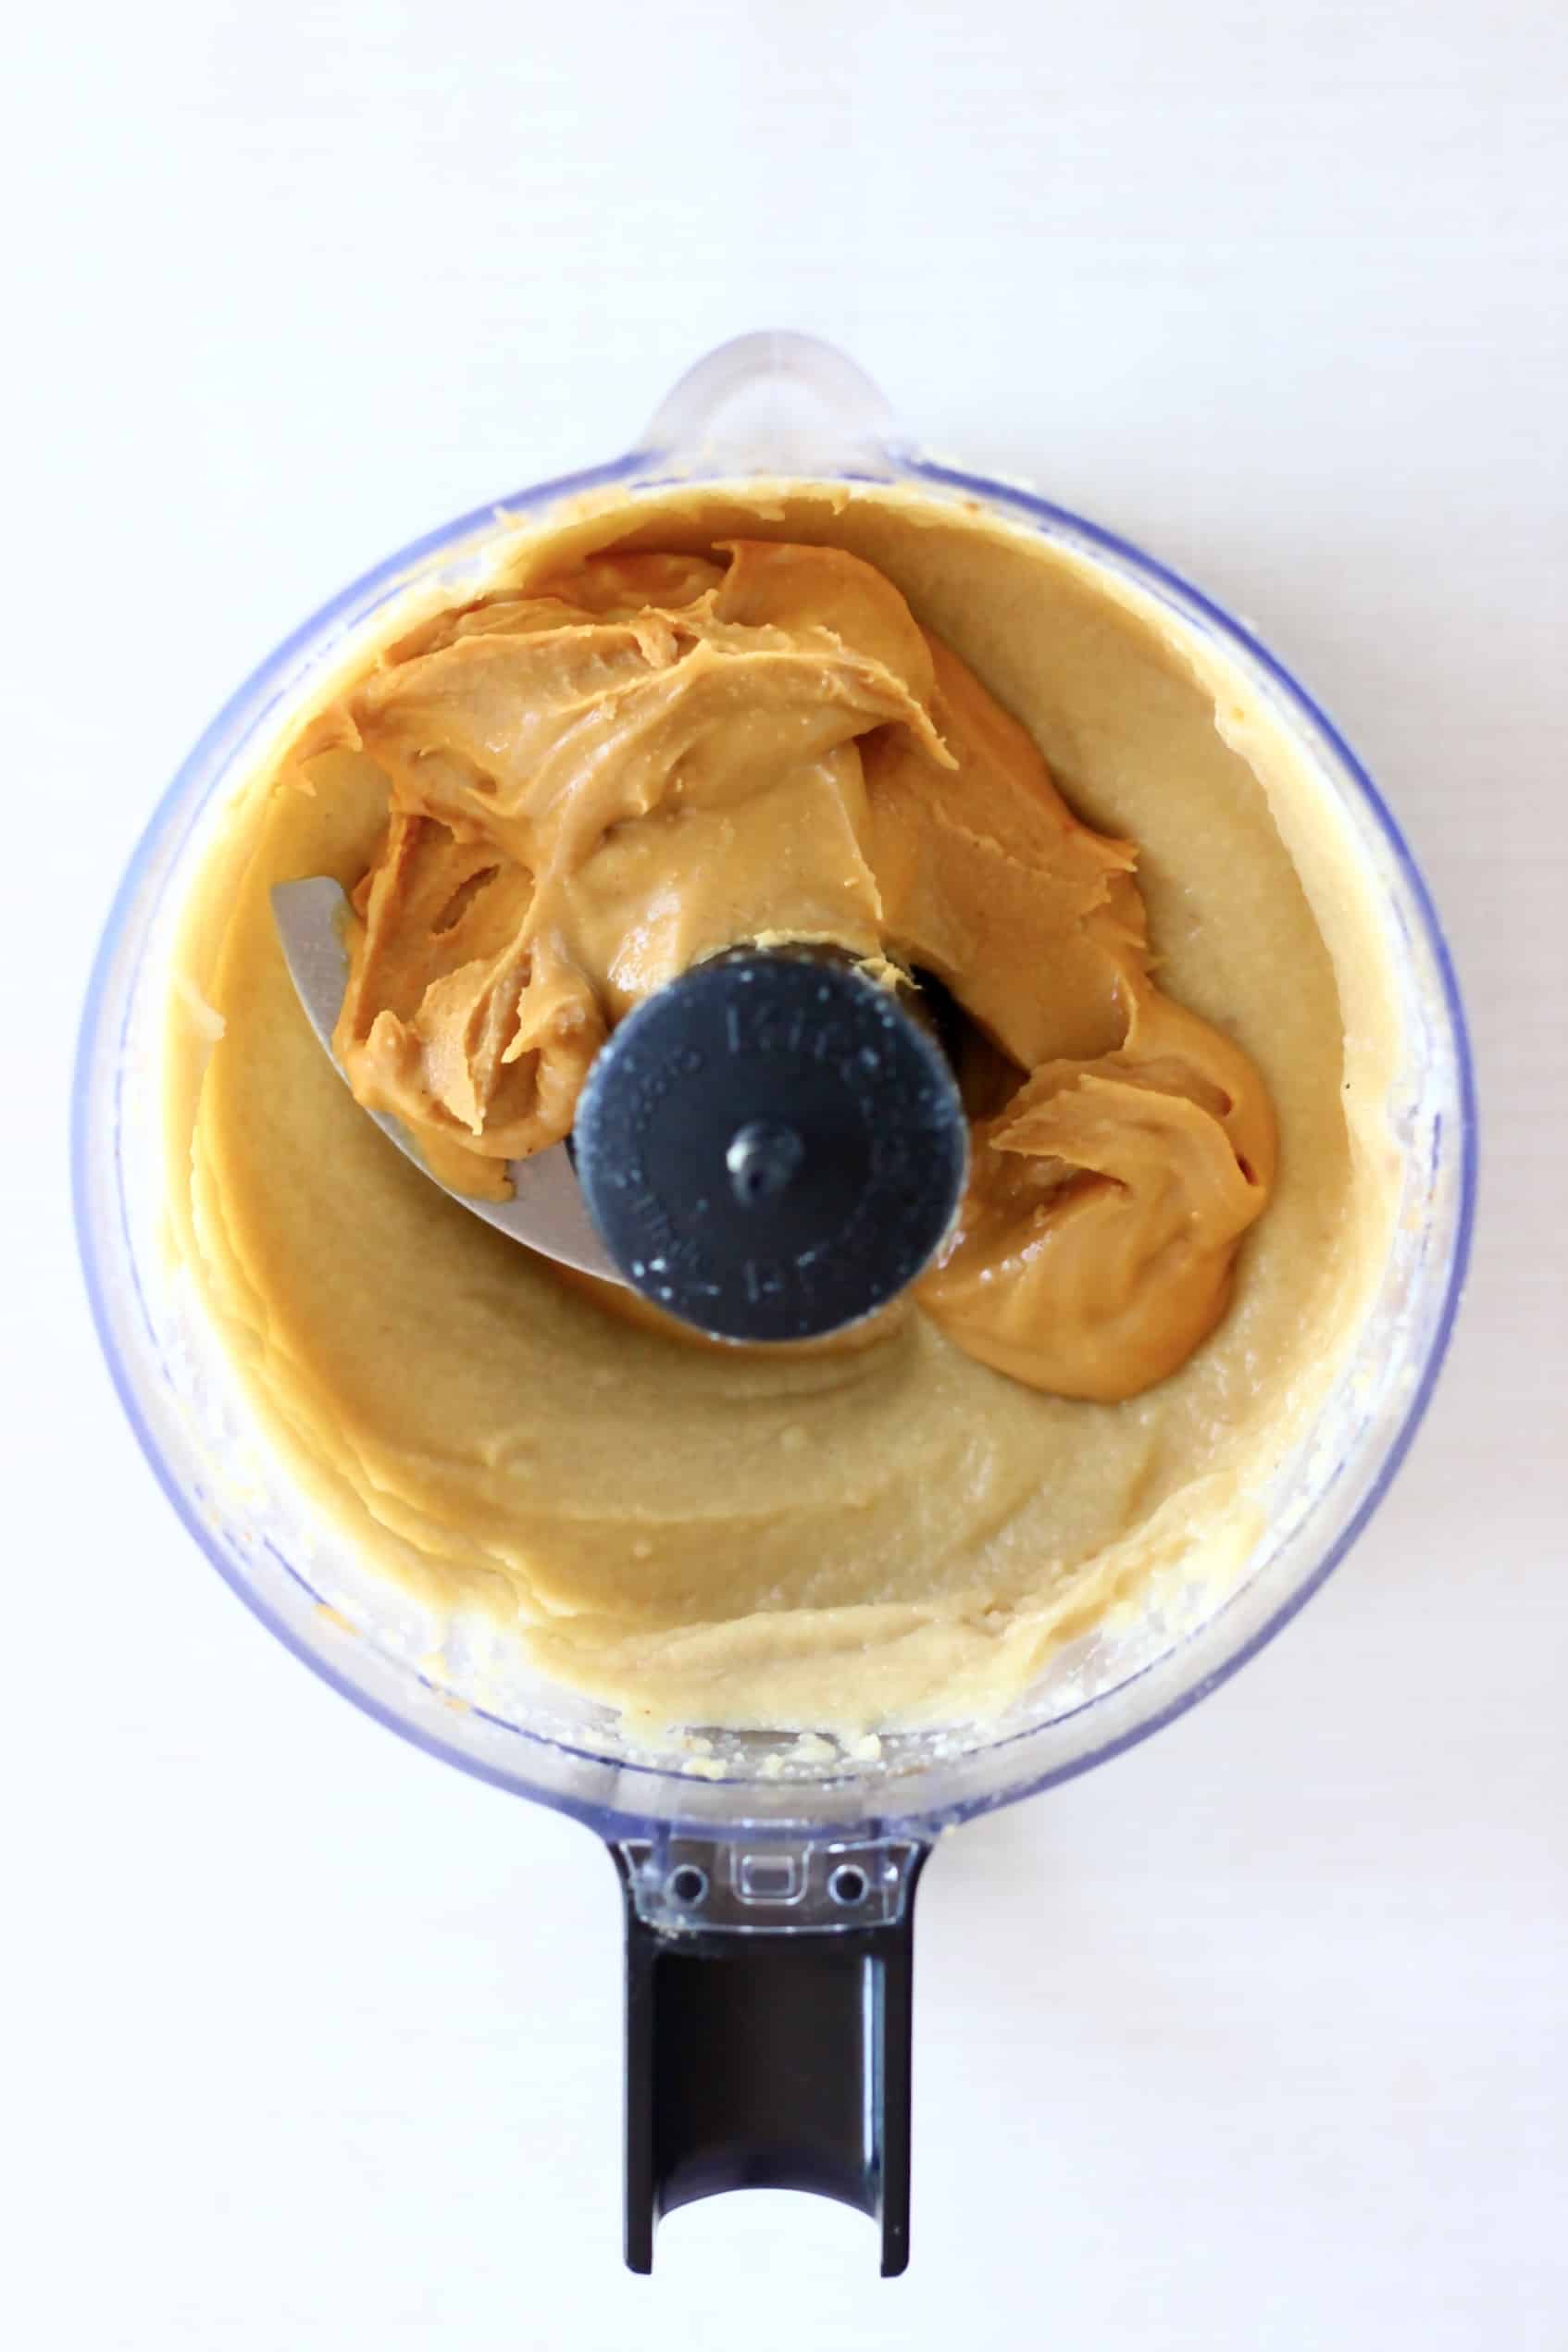 Blended cashew nuts and peanut butter in a food processor